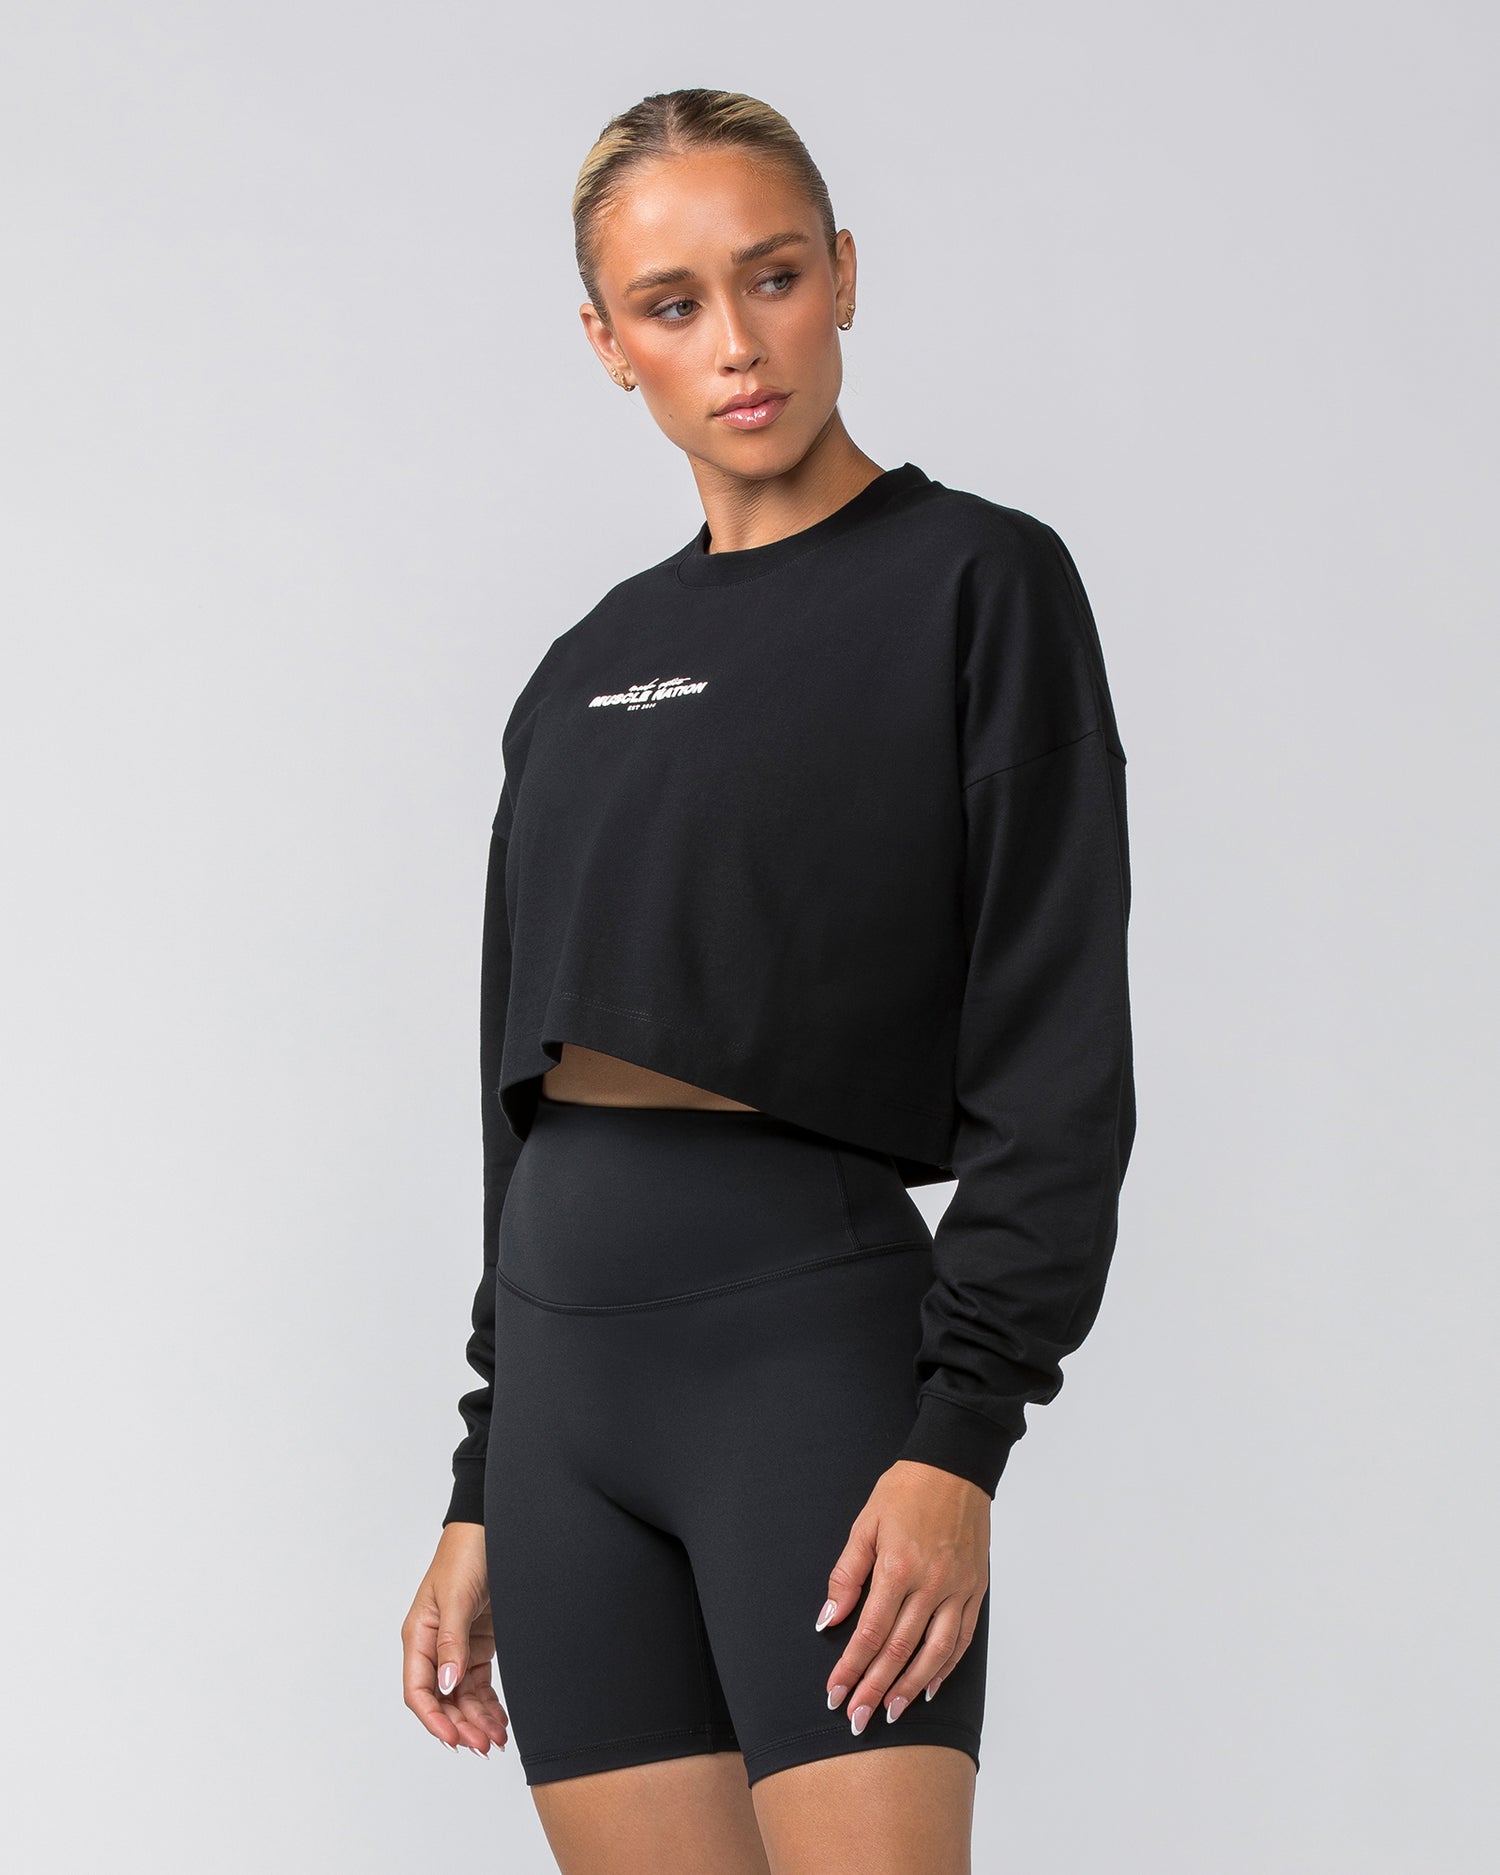 Pace Cropped Long Sleeve Tee - Black